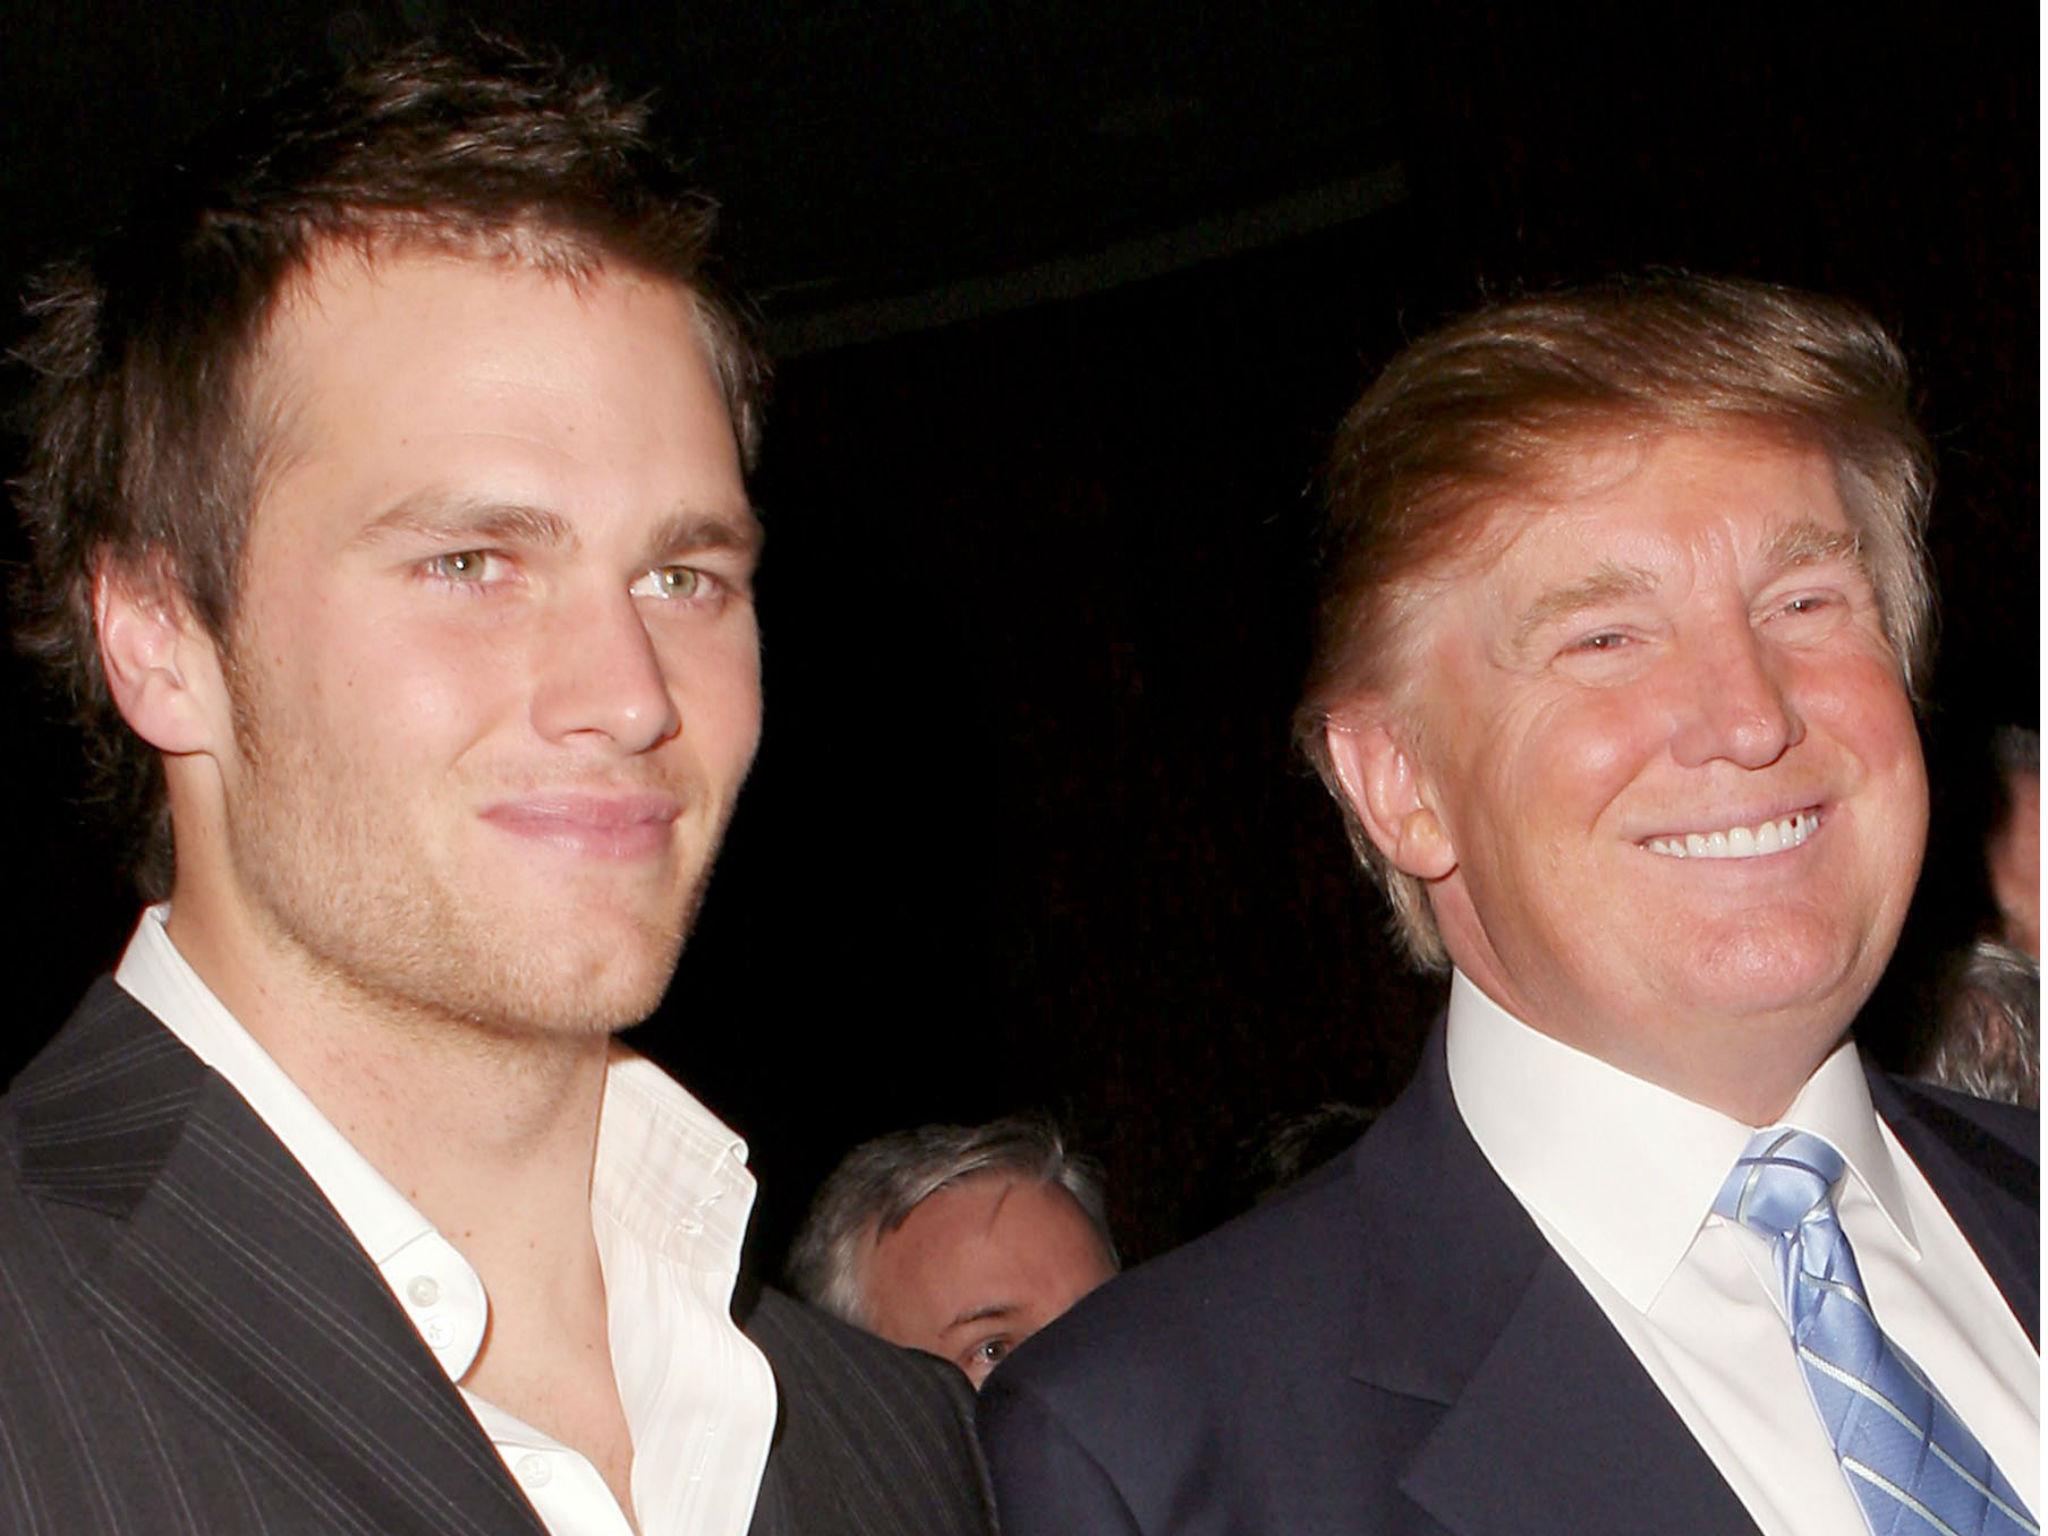 Tom Brady won't be visiting the White House on Wednesday